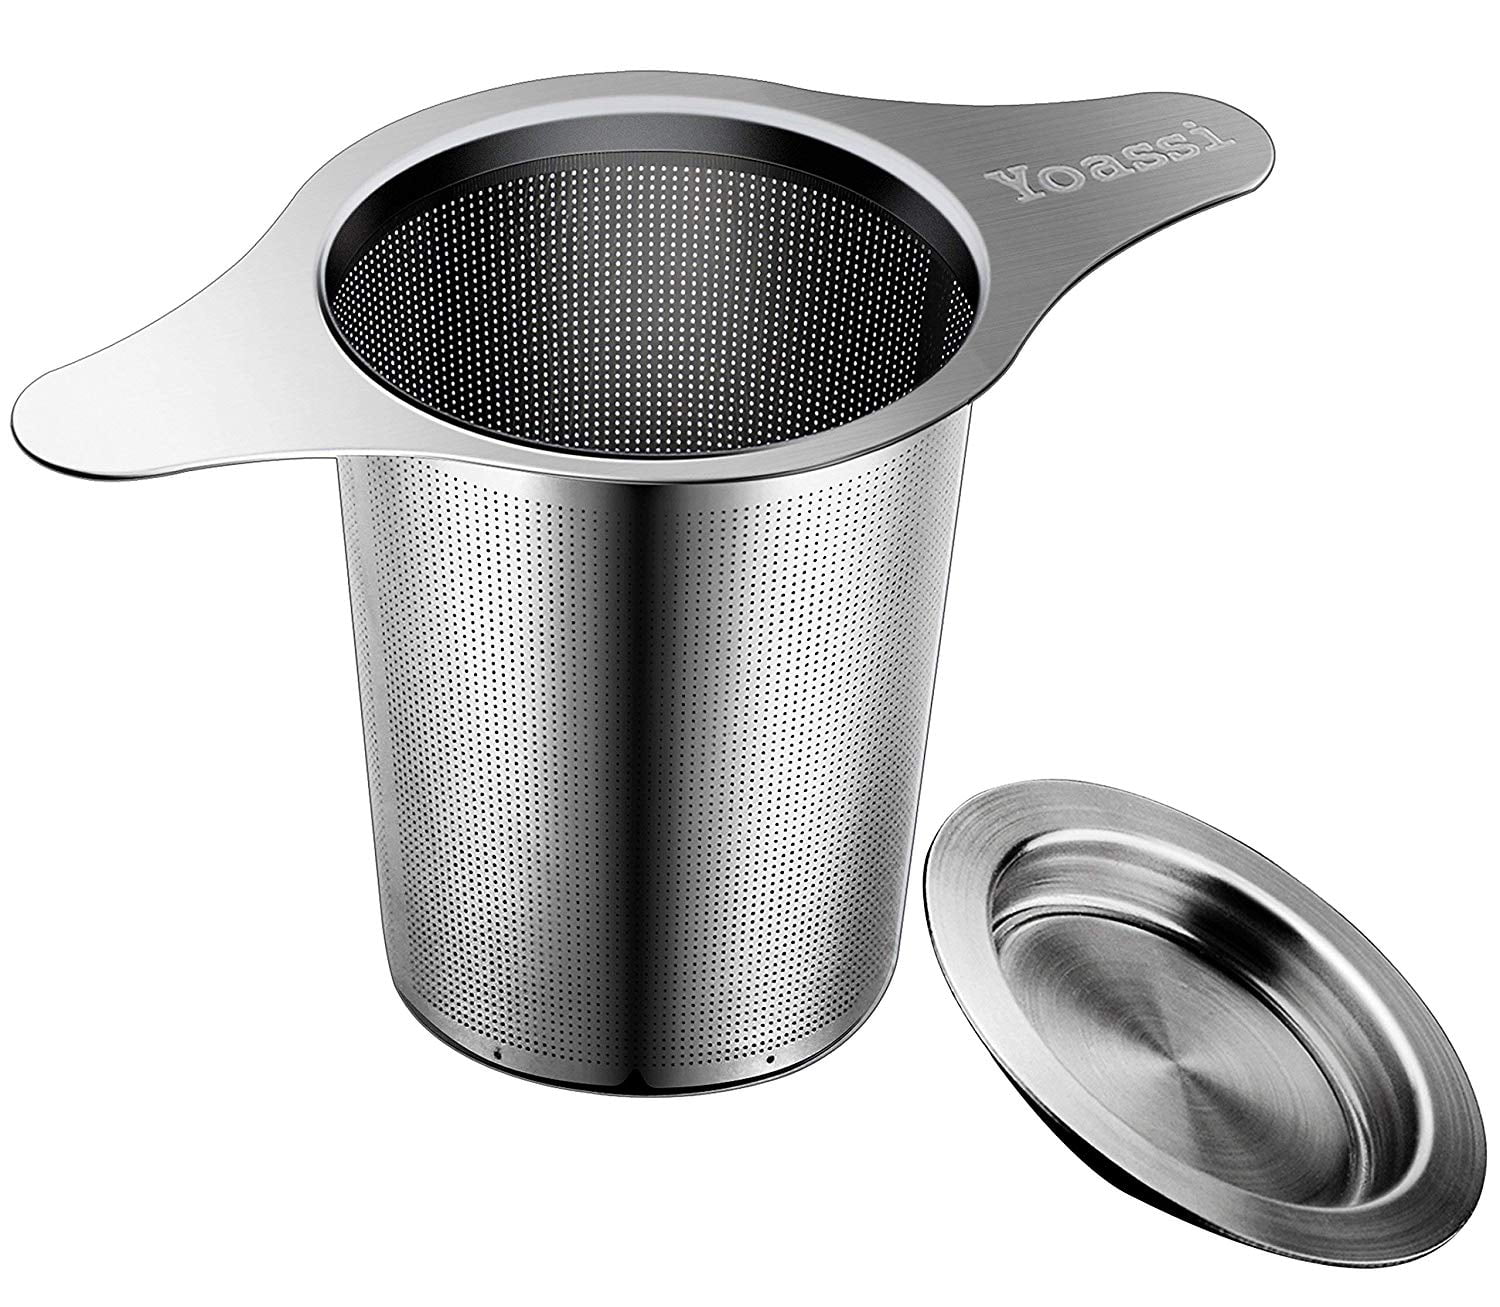 for Brew Loose Leaf Tea and Spices & Seasonings with Extended Chain Hook Stainless Steel Tea Ball Infuser Silver Tea Filter KKTICK 2 Pcs Tea Strainer